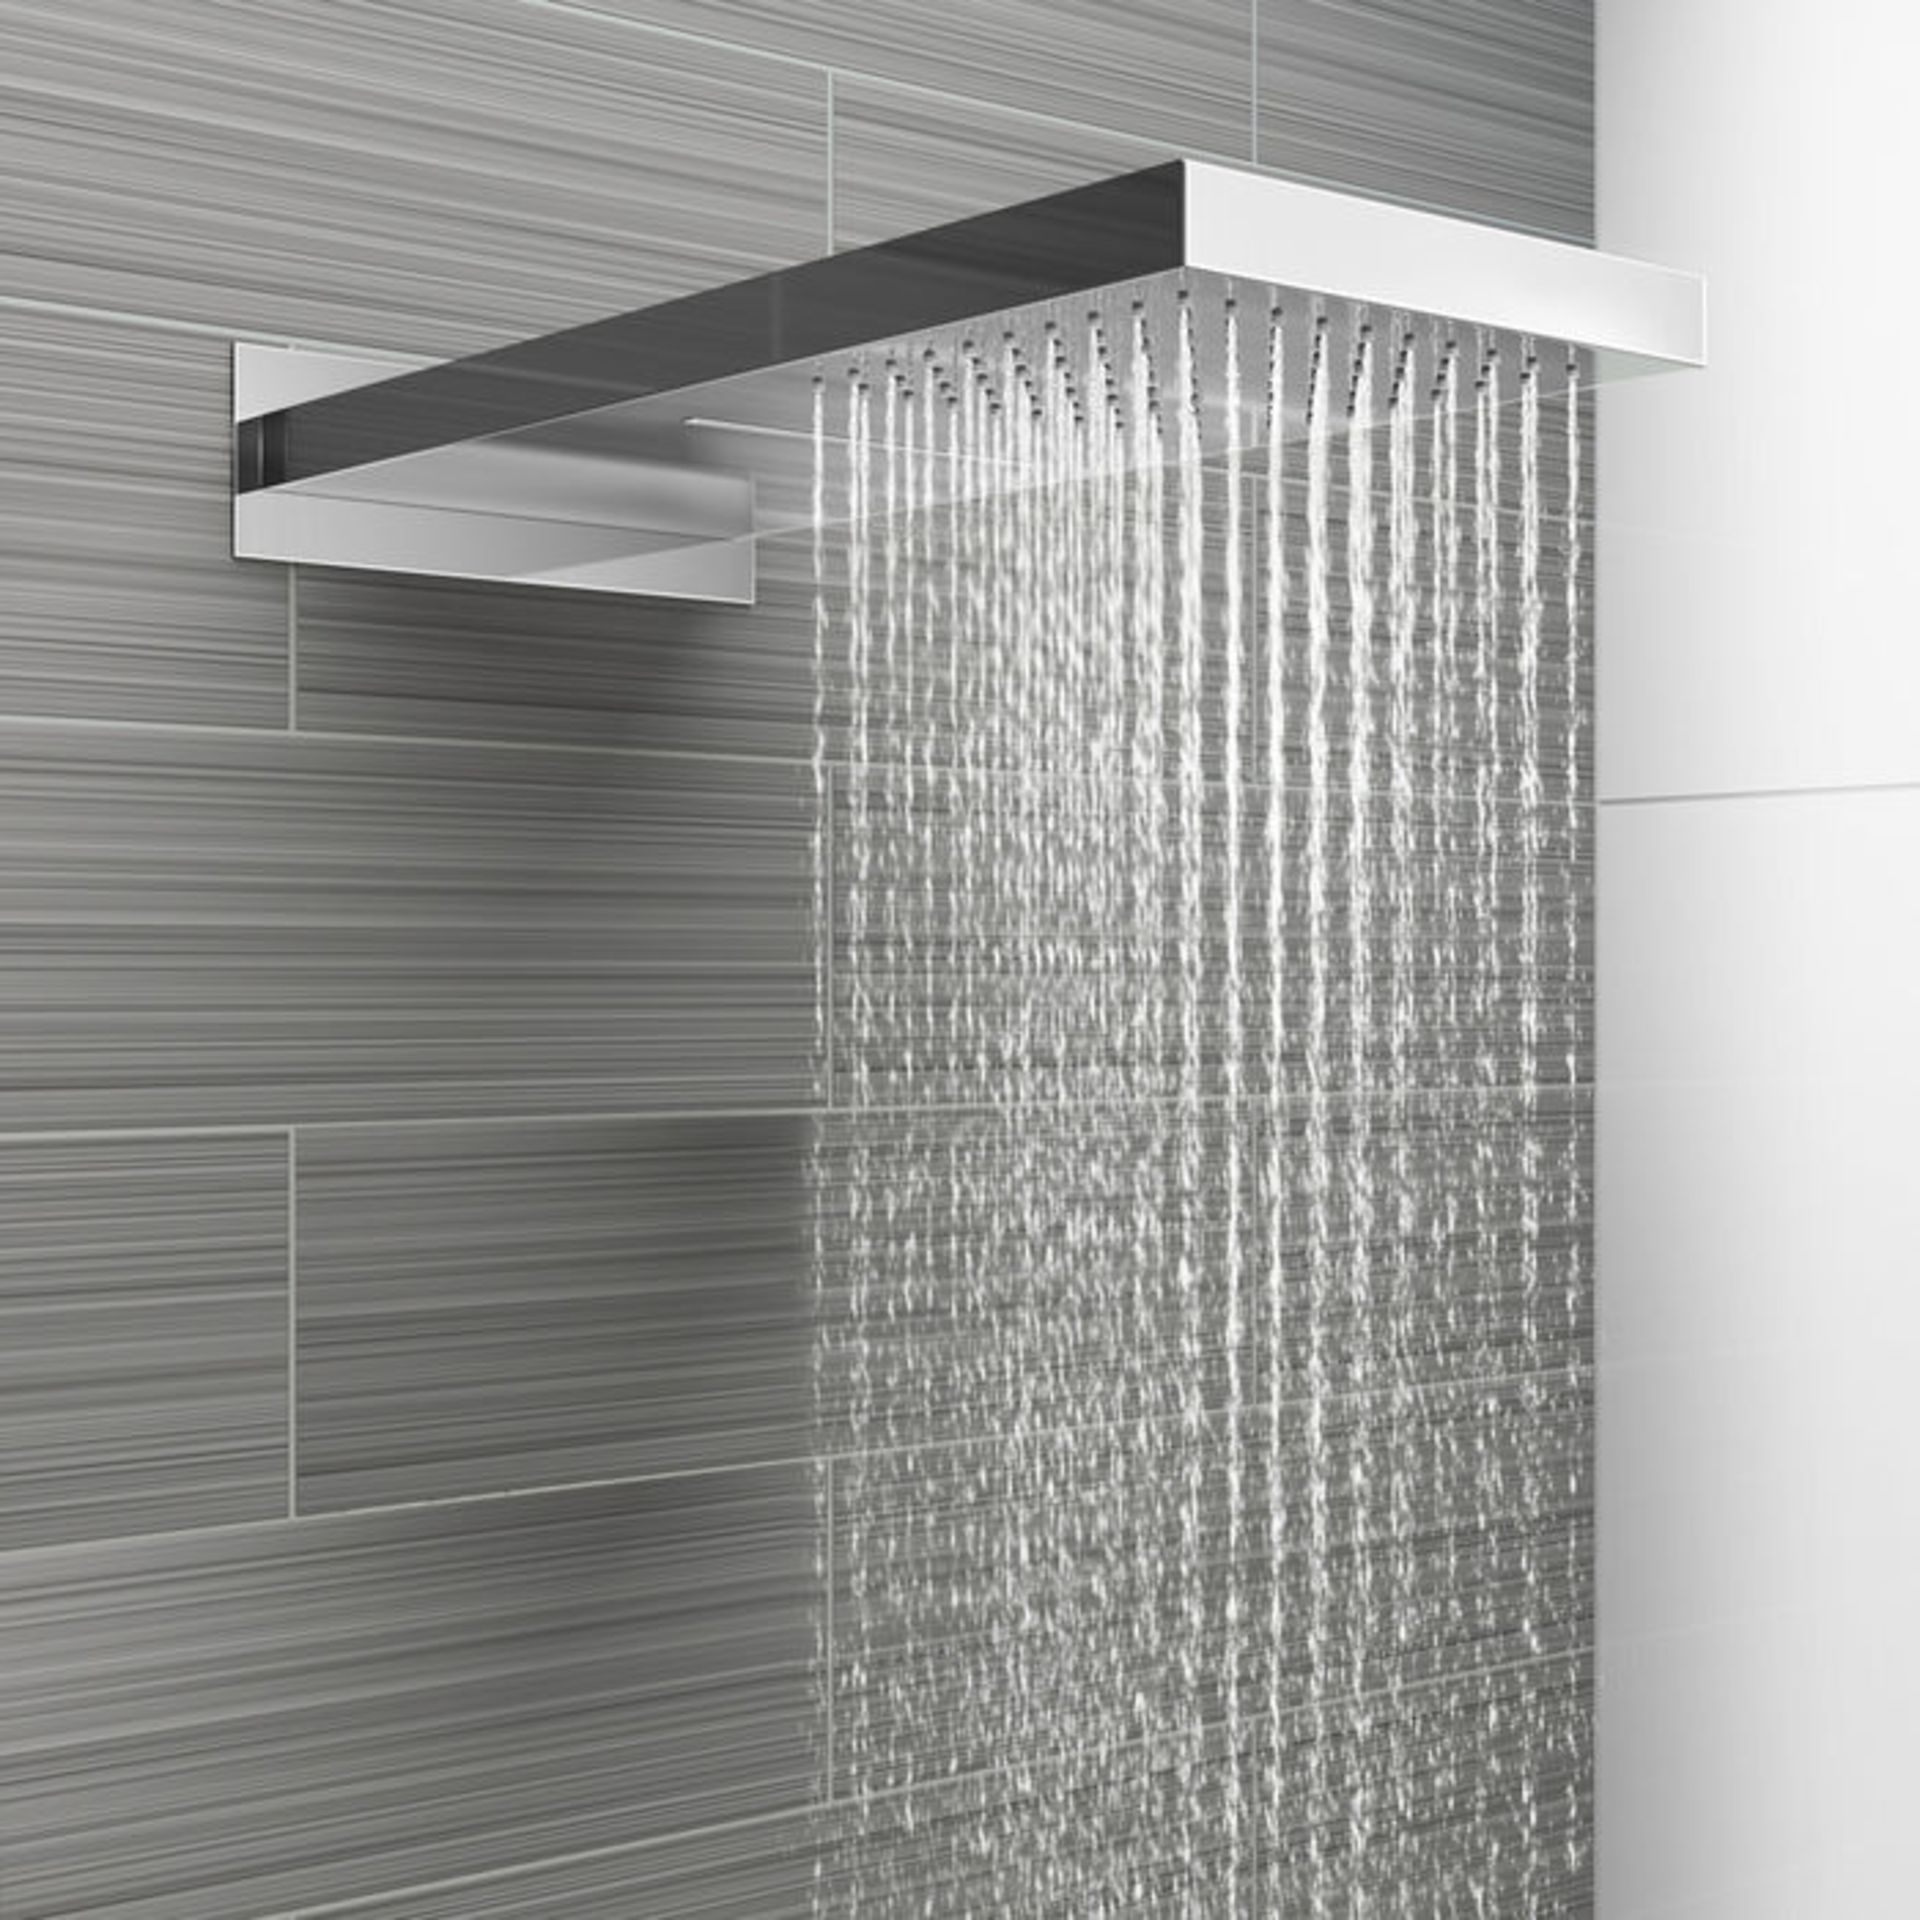 (AL24) Stainless Steel 230x500mm Waterfall Shower Head. RRP £374.98. Dual function waterfall and - Image 3 of 7